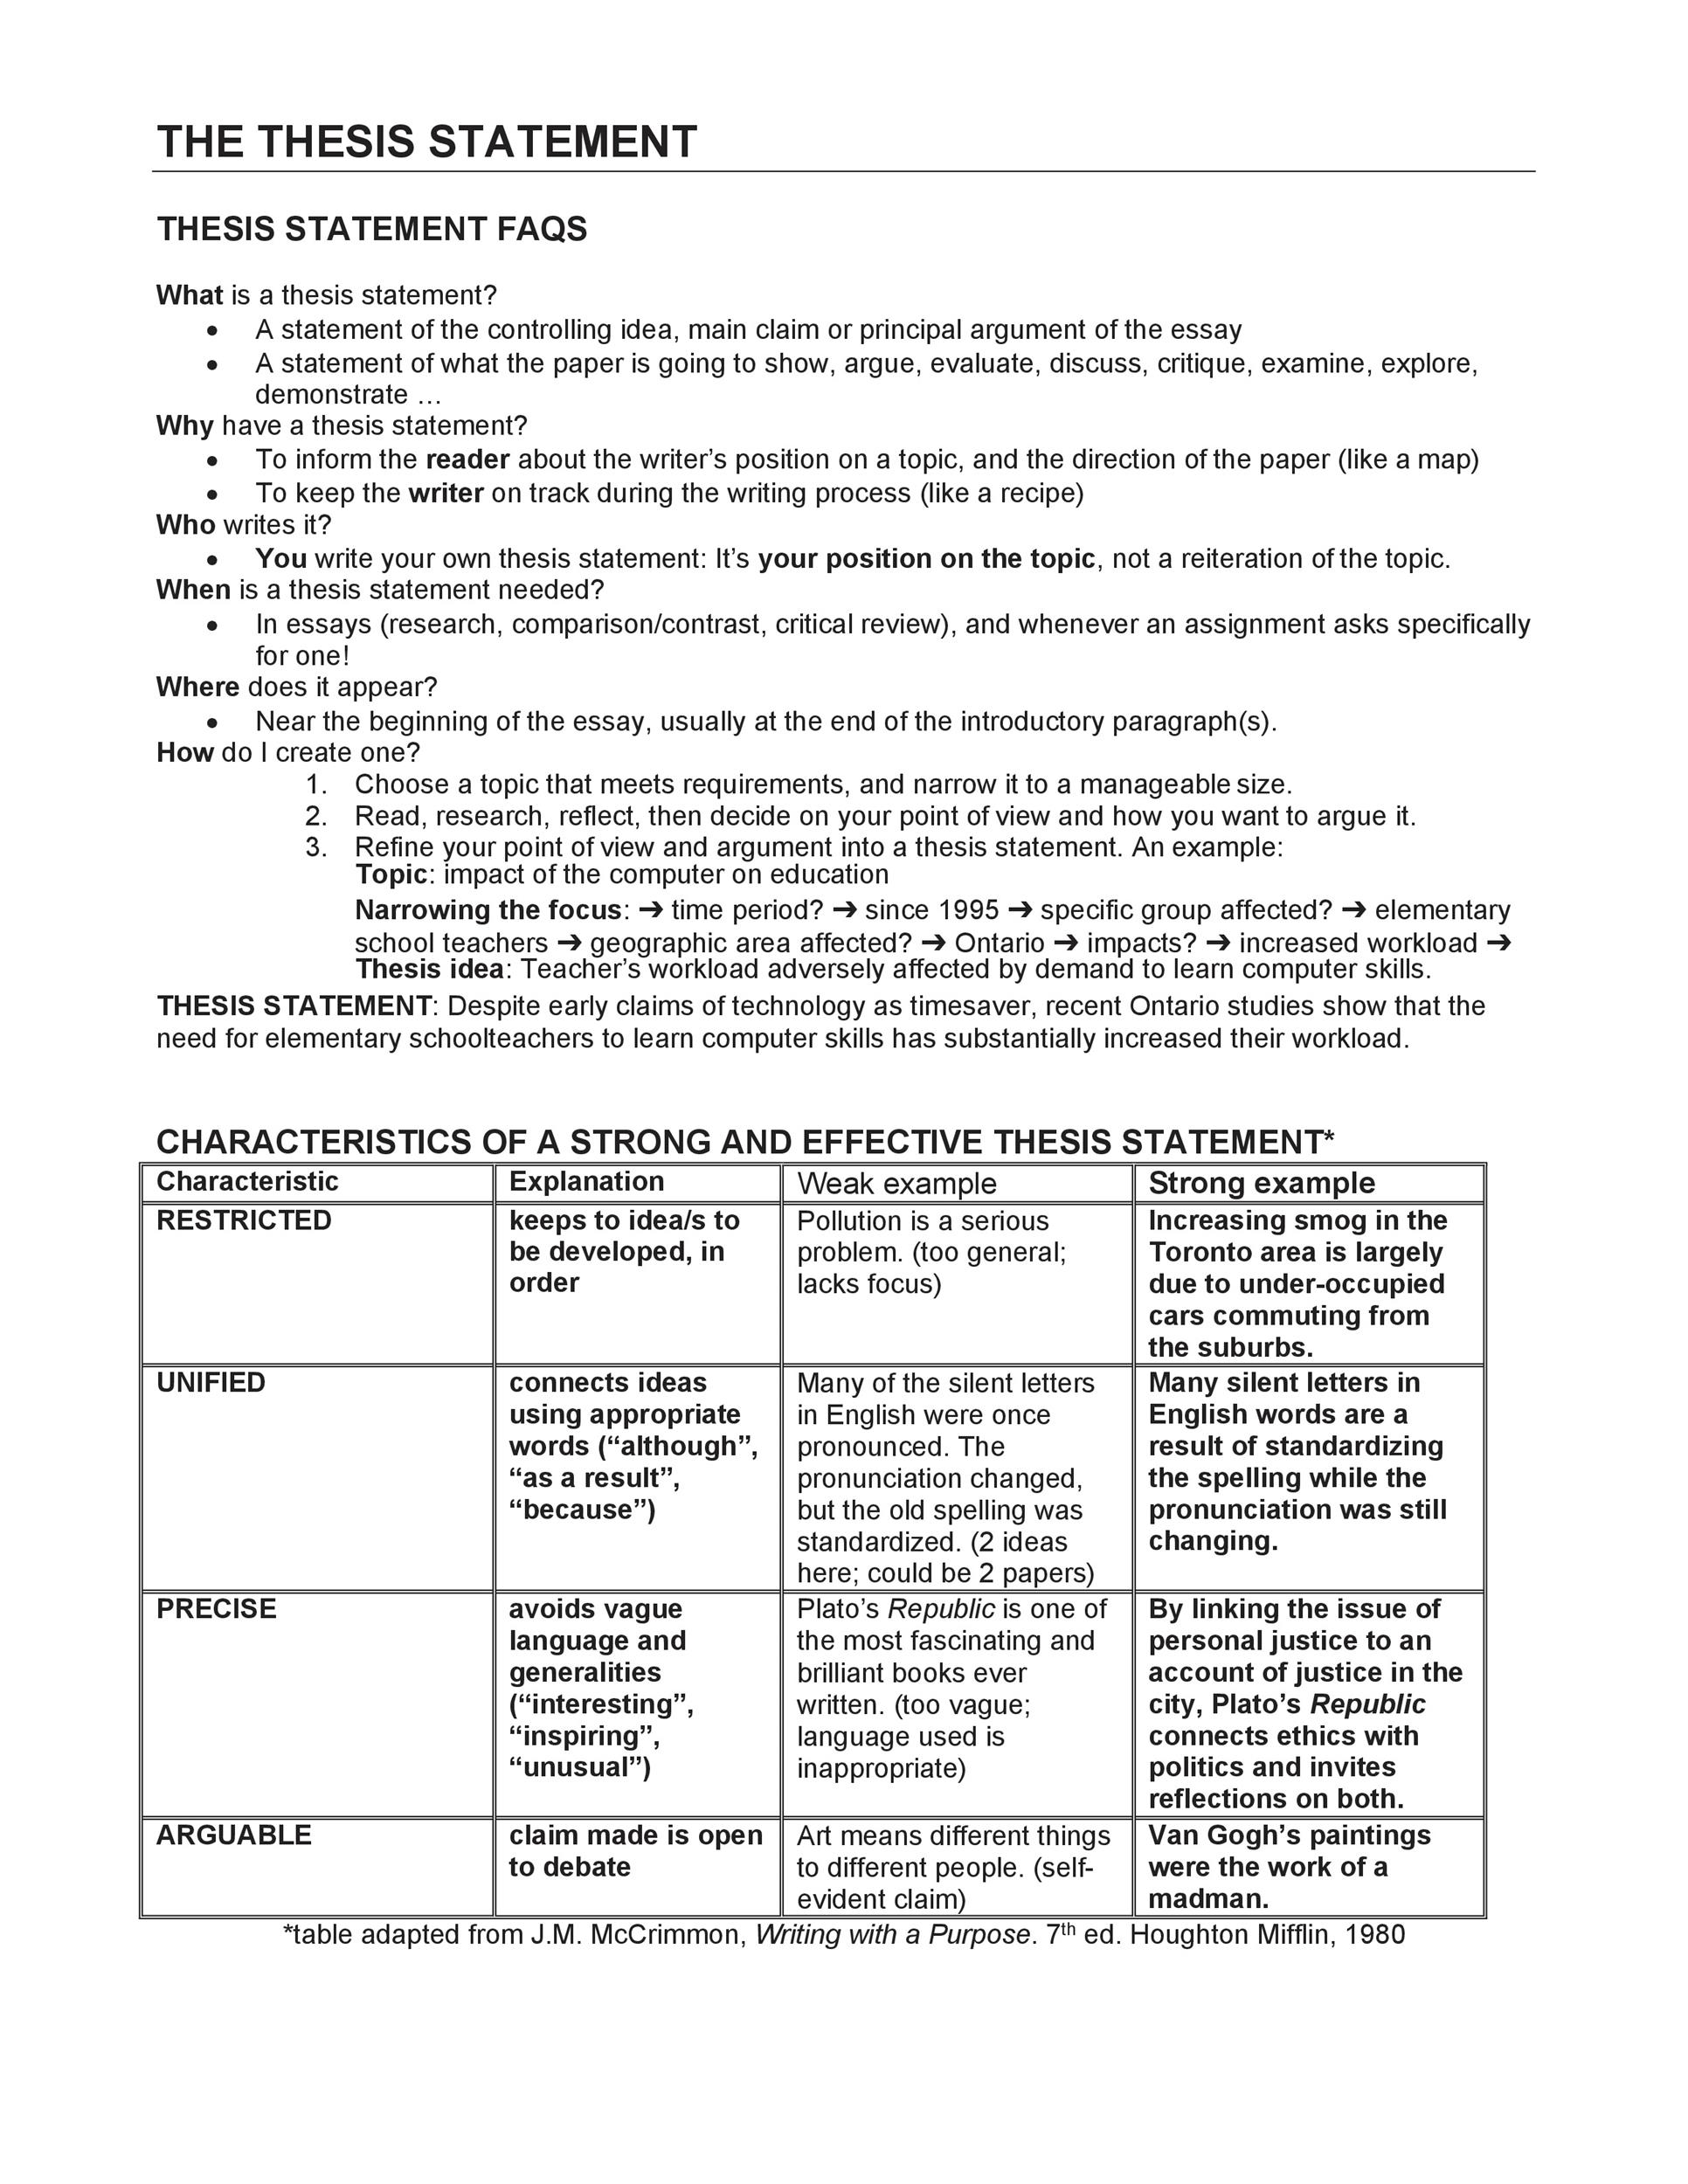 Free thesis statement template 23